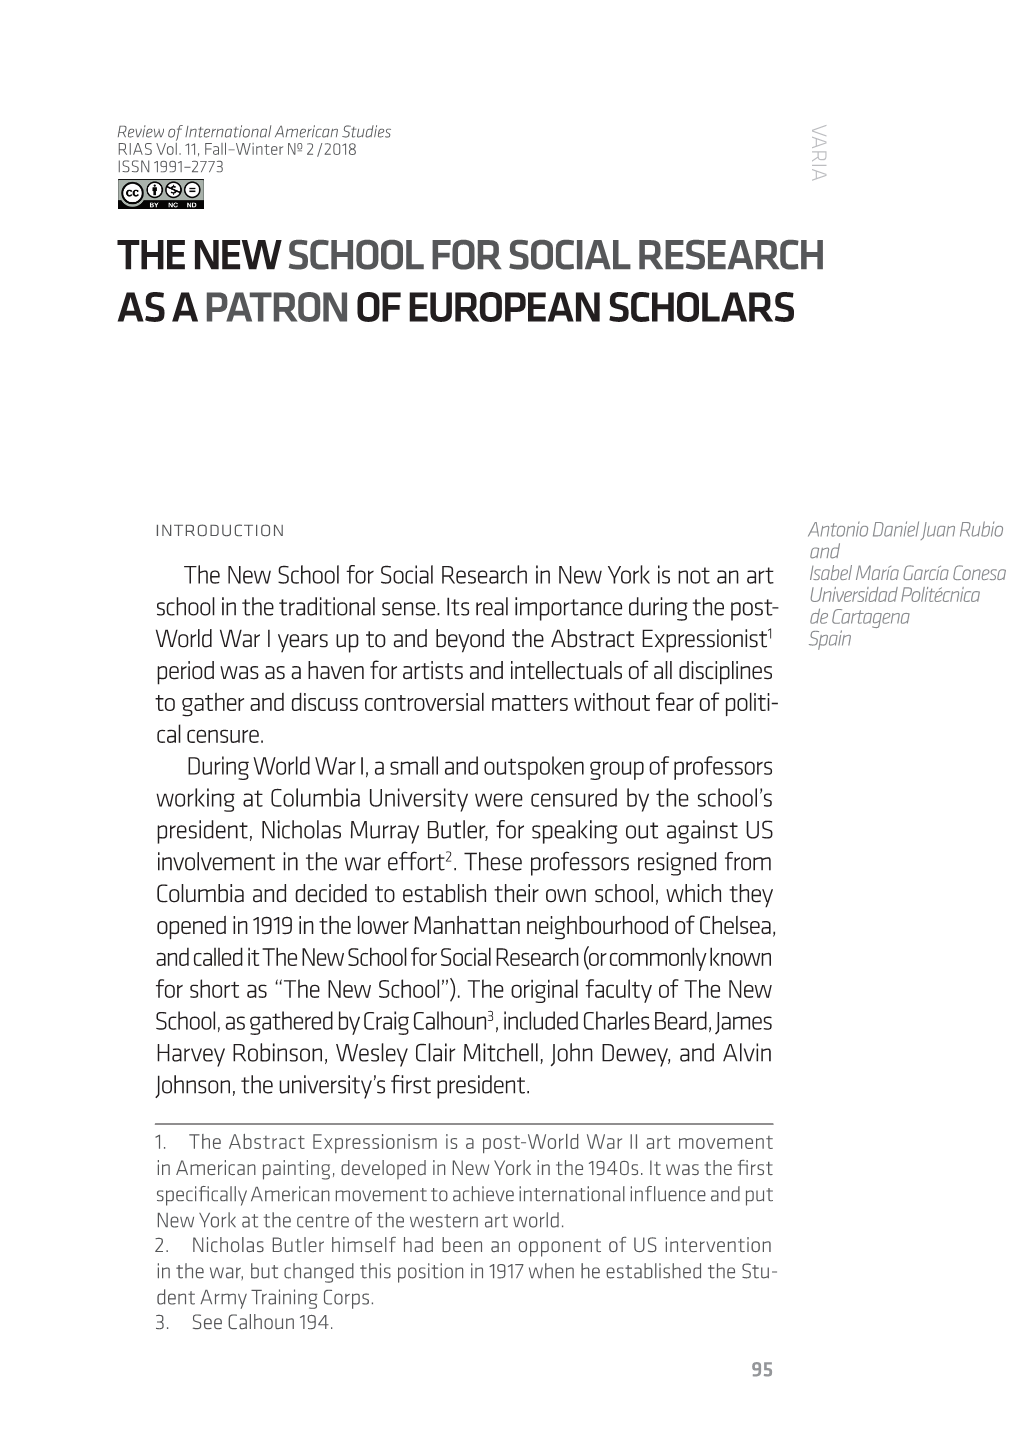 The New Schoolfor Social Research As A